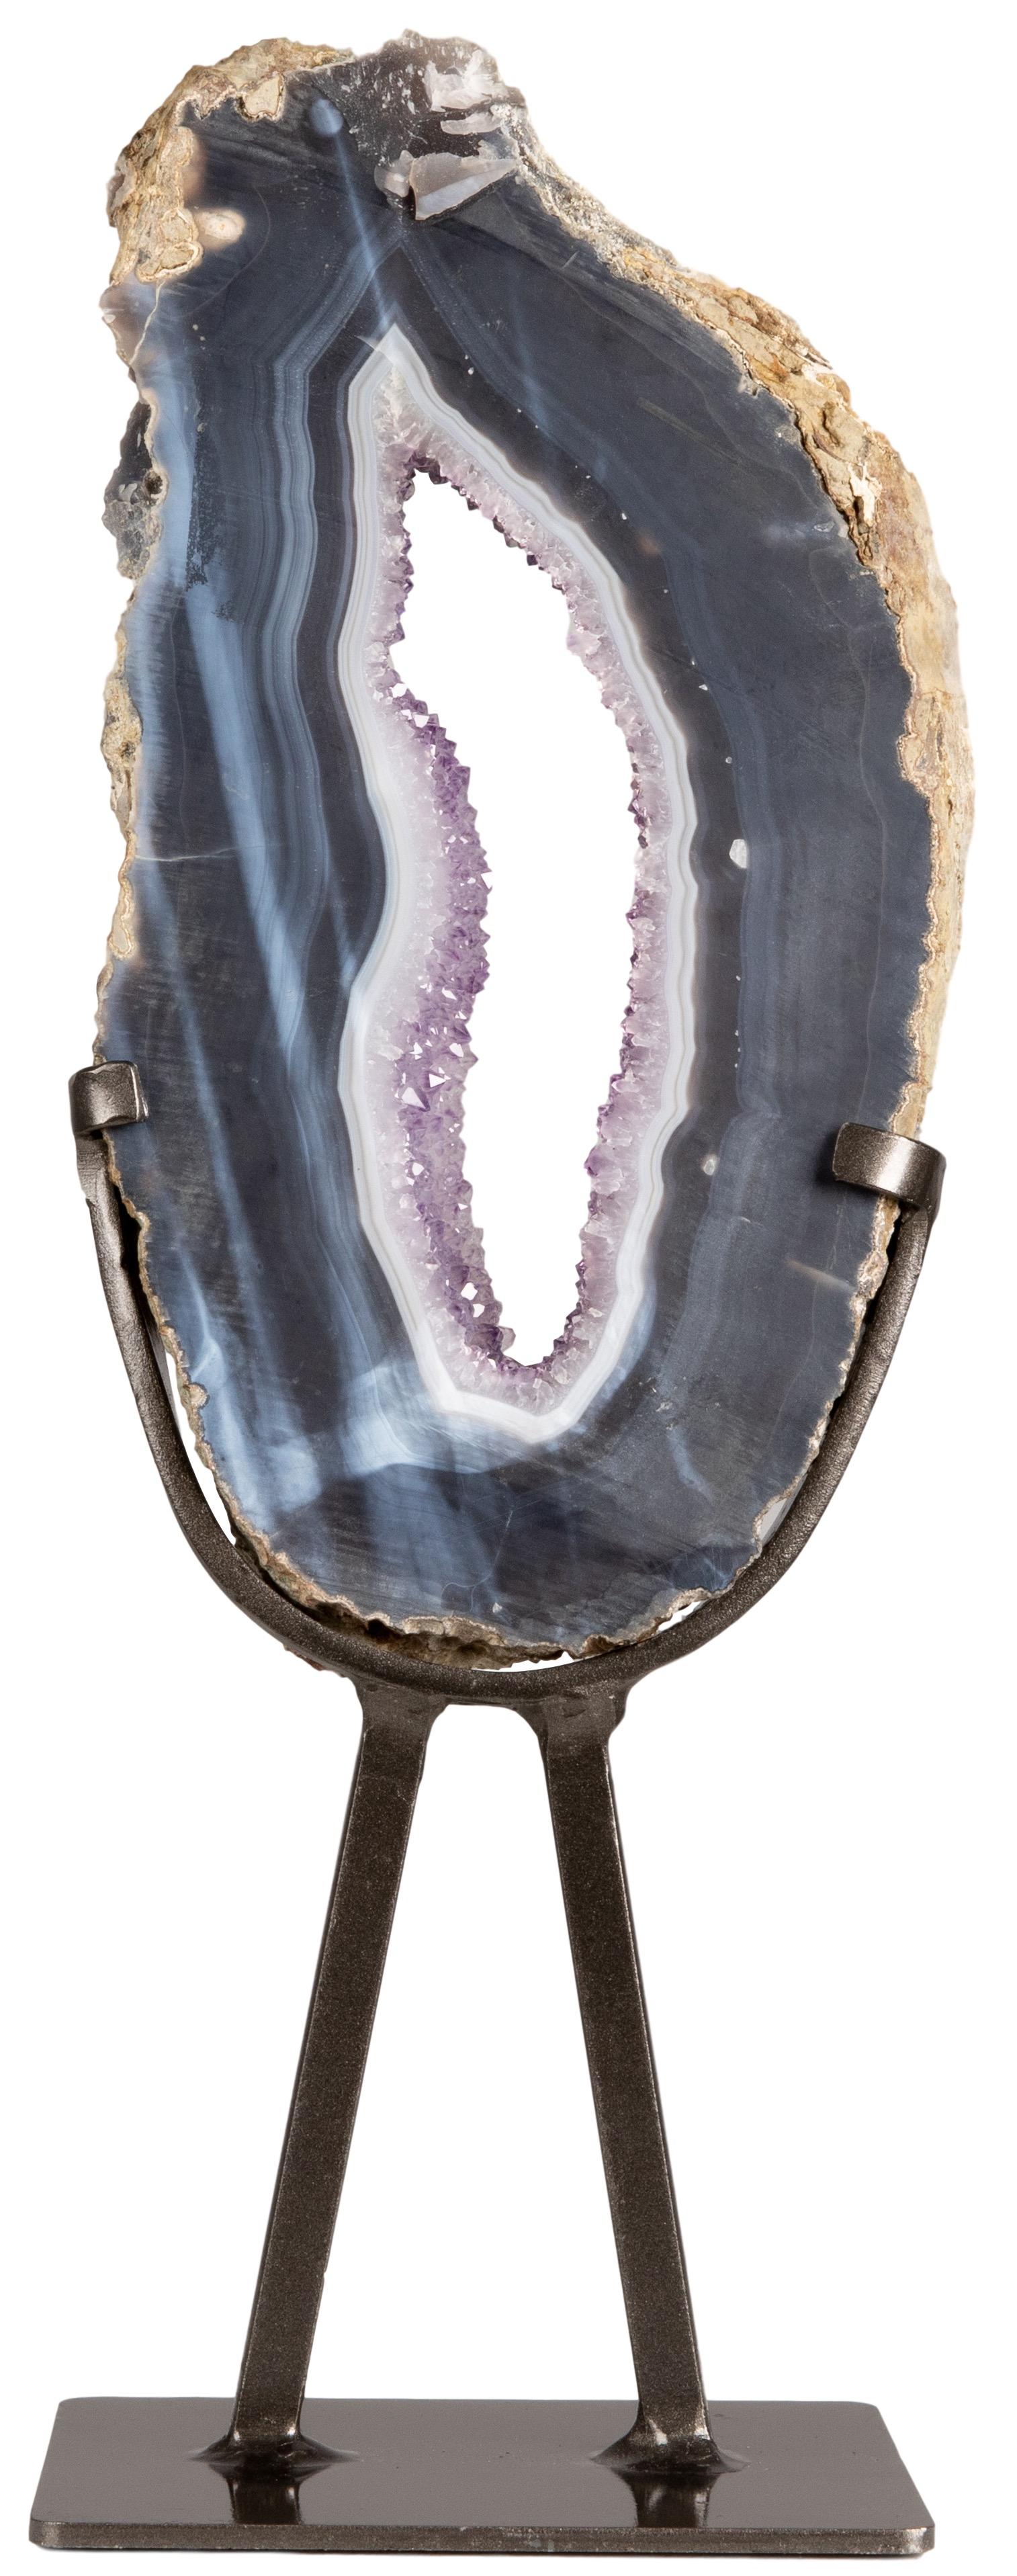 Uruguayan Geode Slice with Amethyst Formation in the Centre Surrounded by Blue Agate